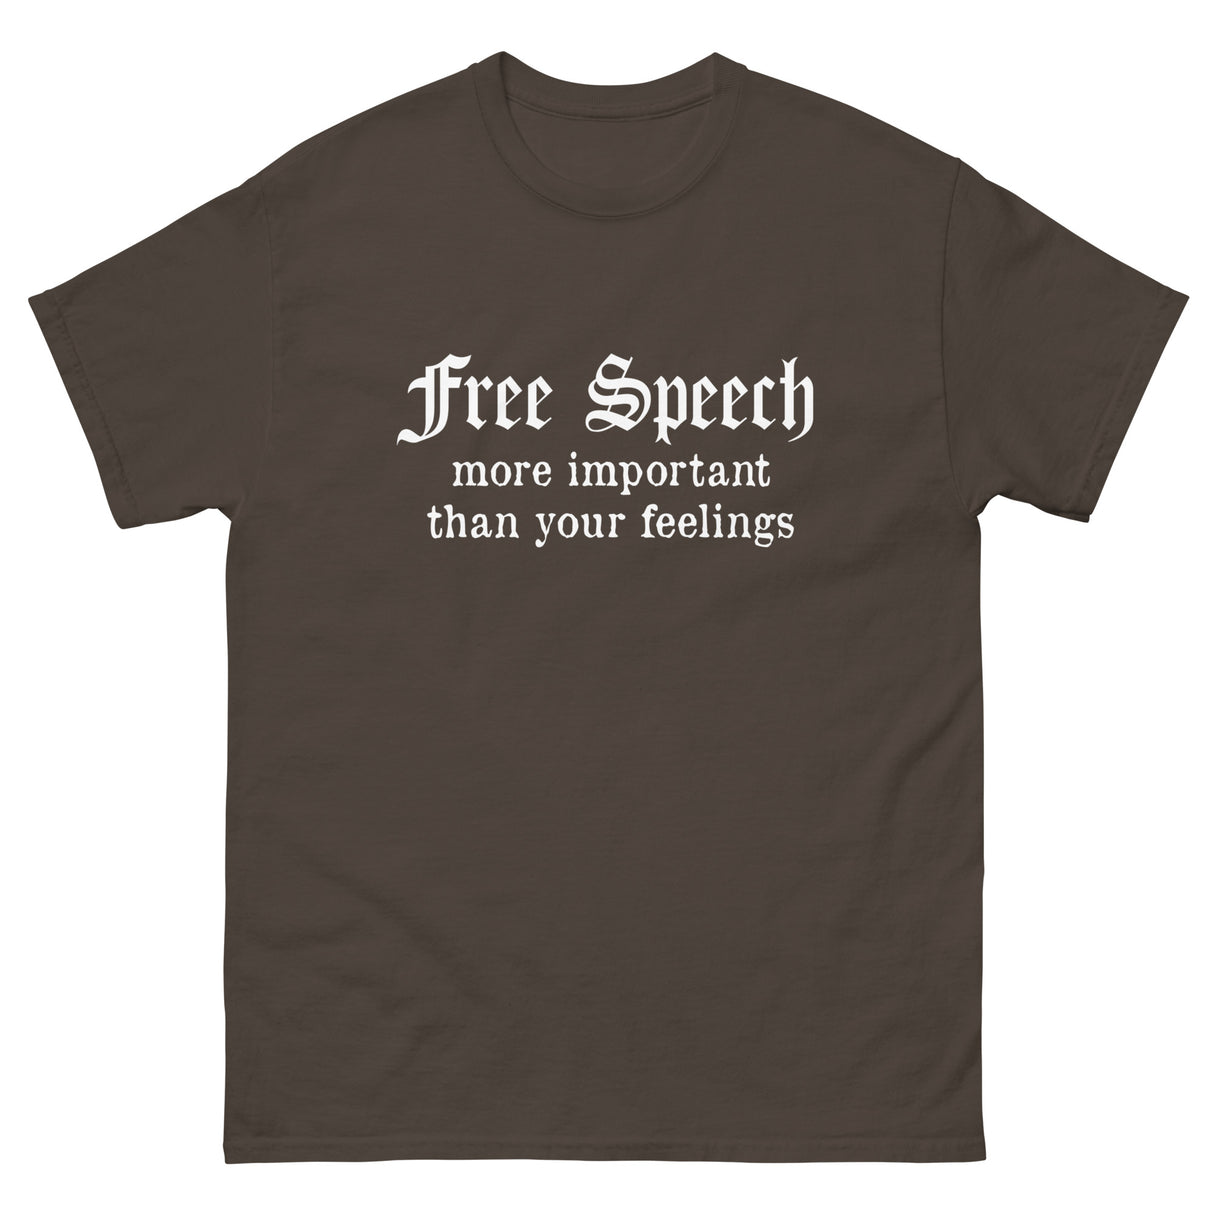 Free Speech More Important Than Your Feelings Heavy Cotton Shirt - Libertarian Country